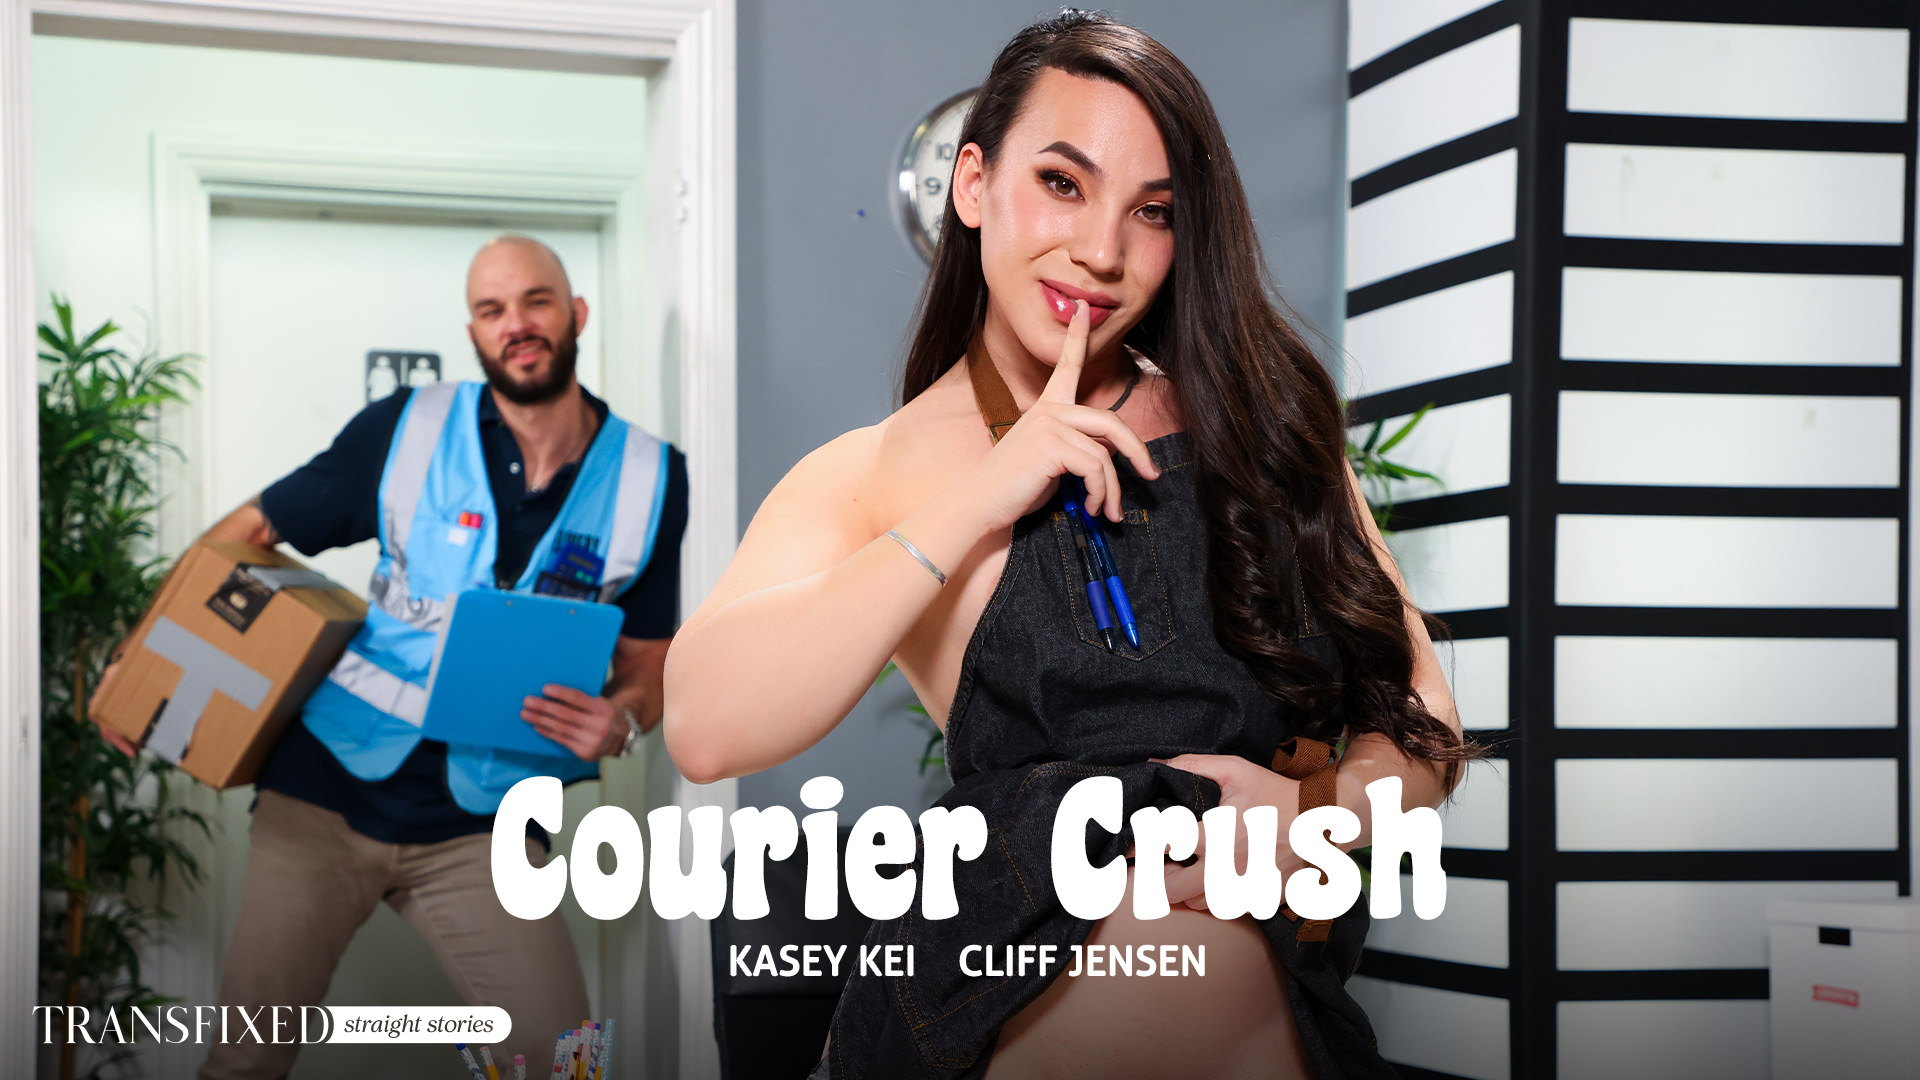 Courier Crush, Scene #01 with Kasey Kei, Cliff Jensen in Transfixed by Adult Time